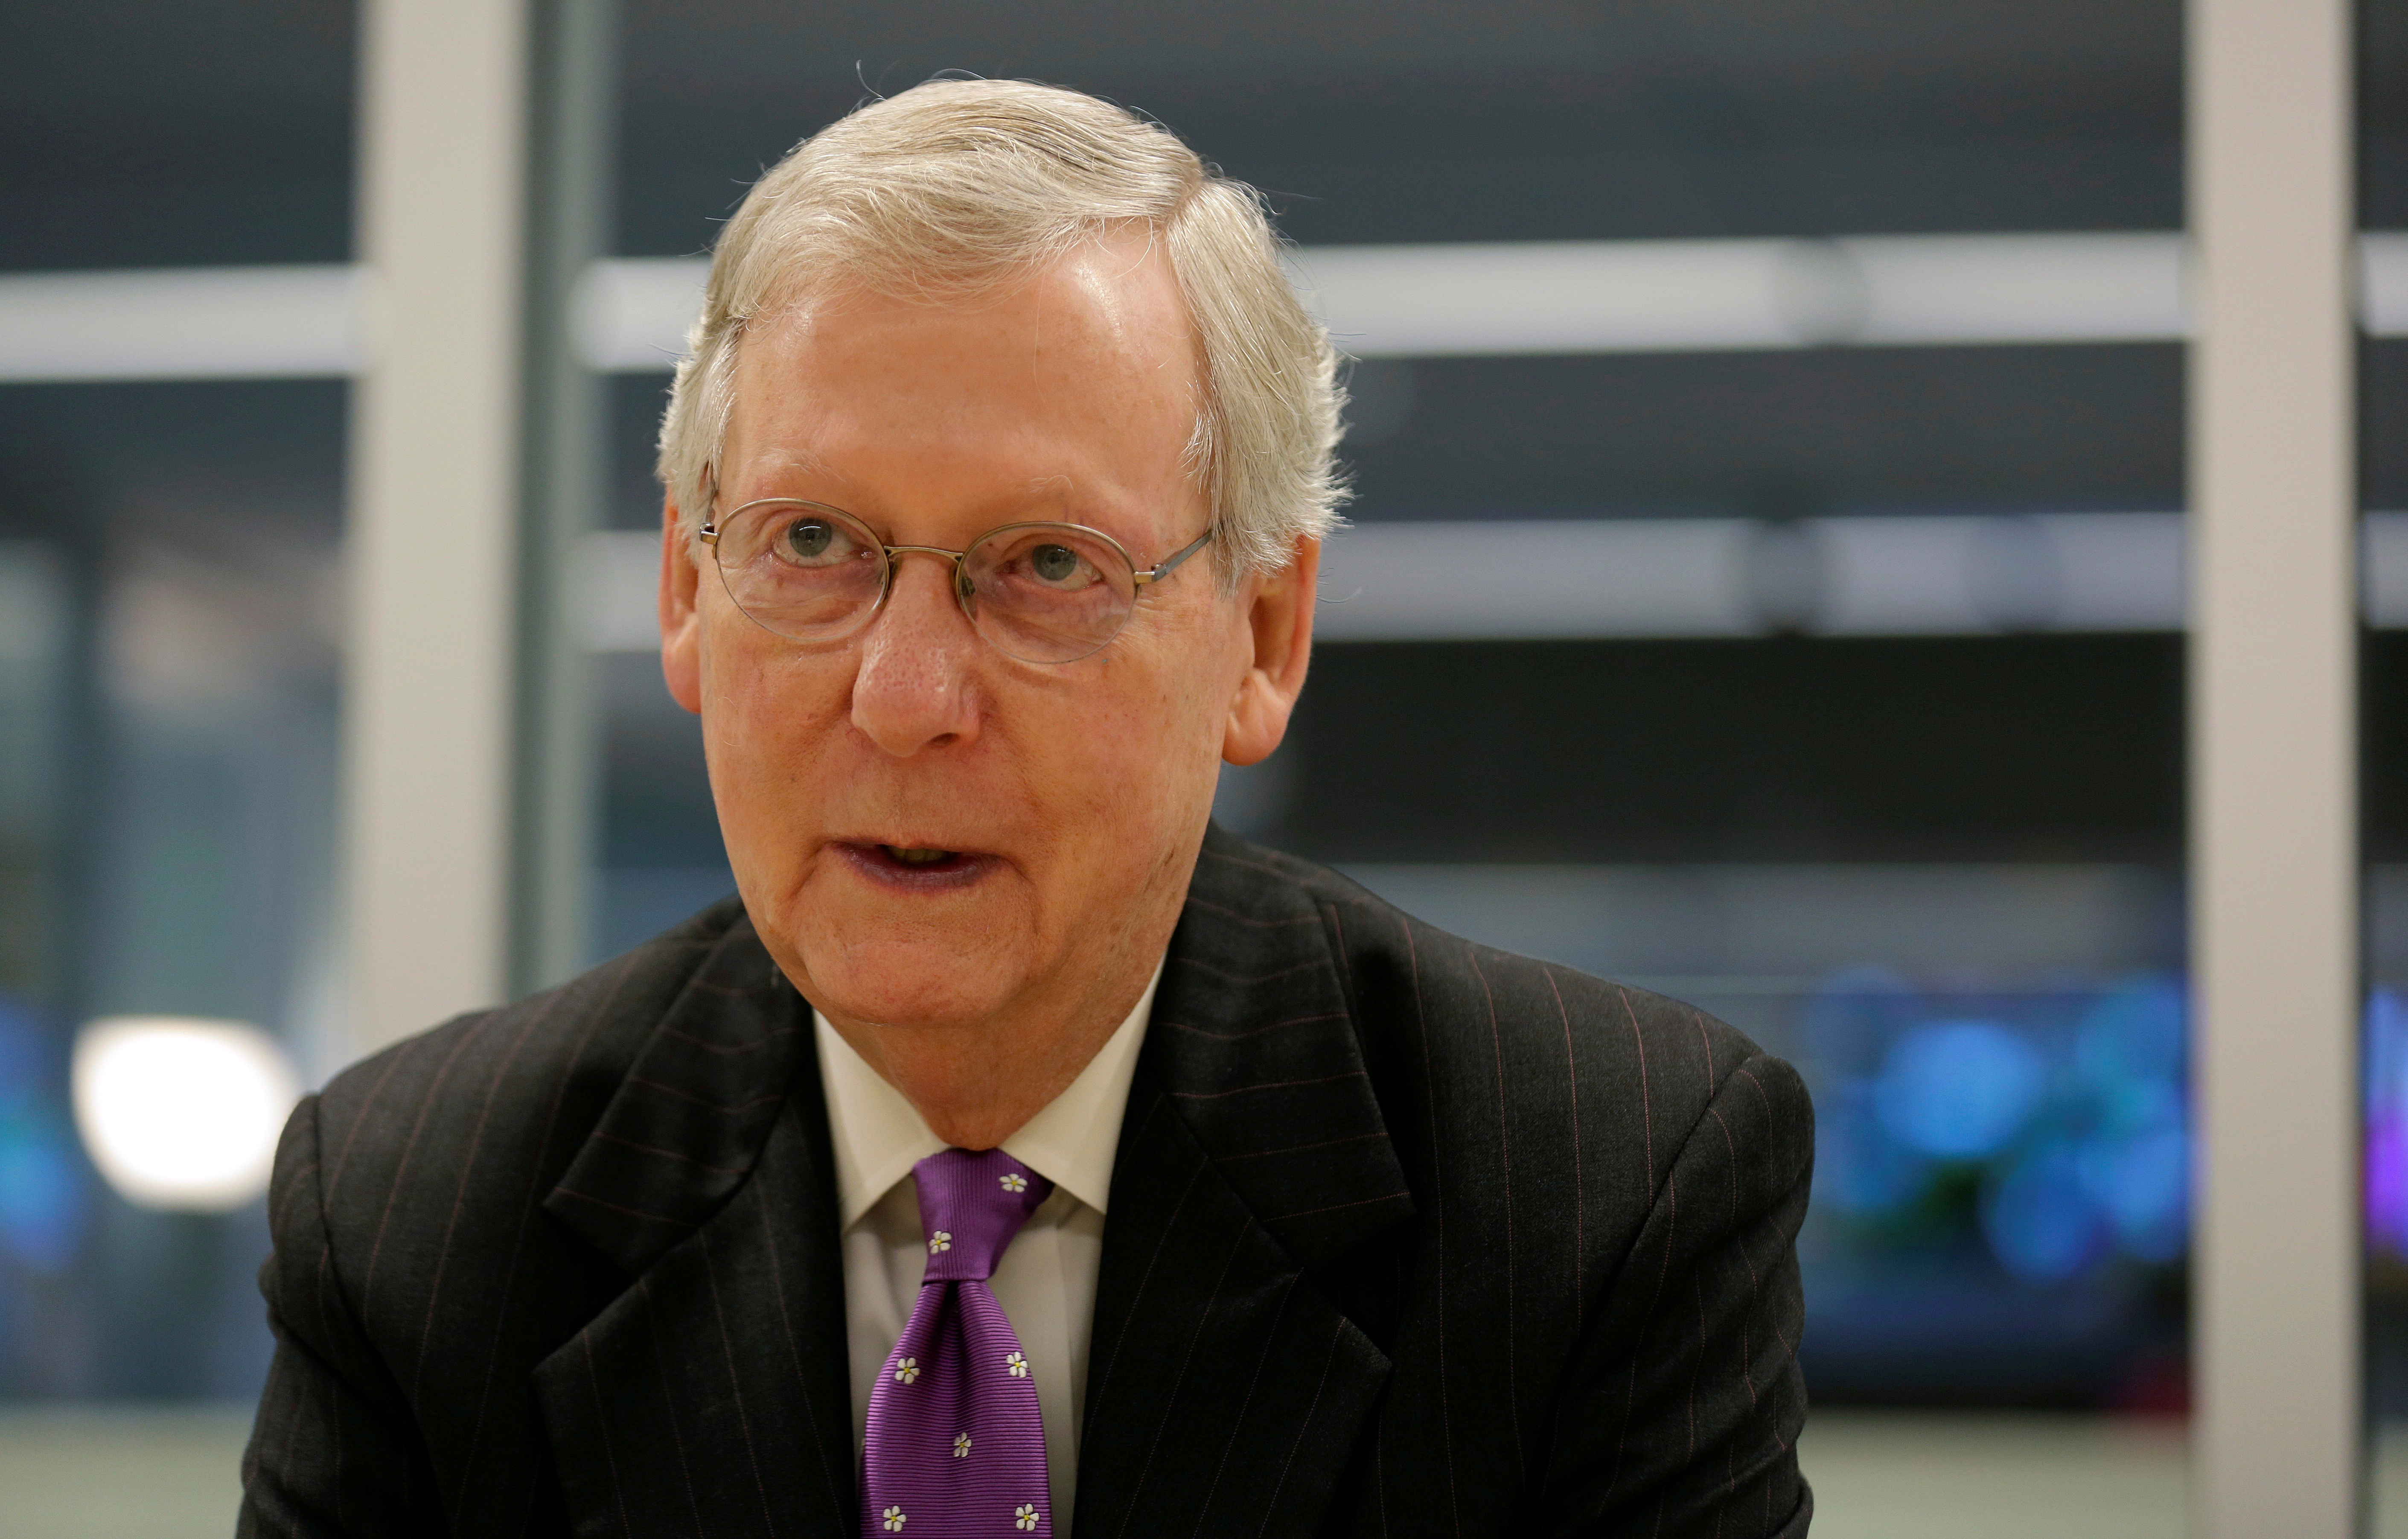 Senate Majority Leader McConnell speaks to Reuters during an interview in Washington